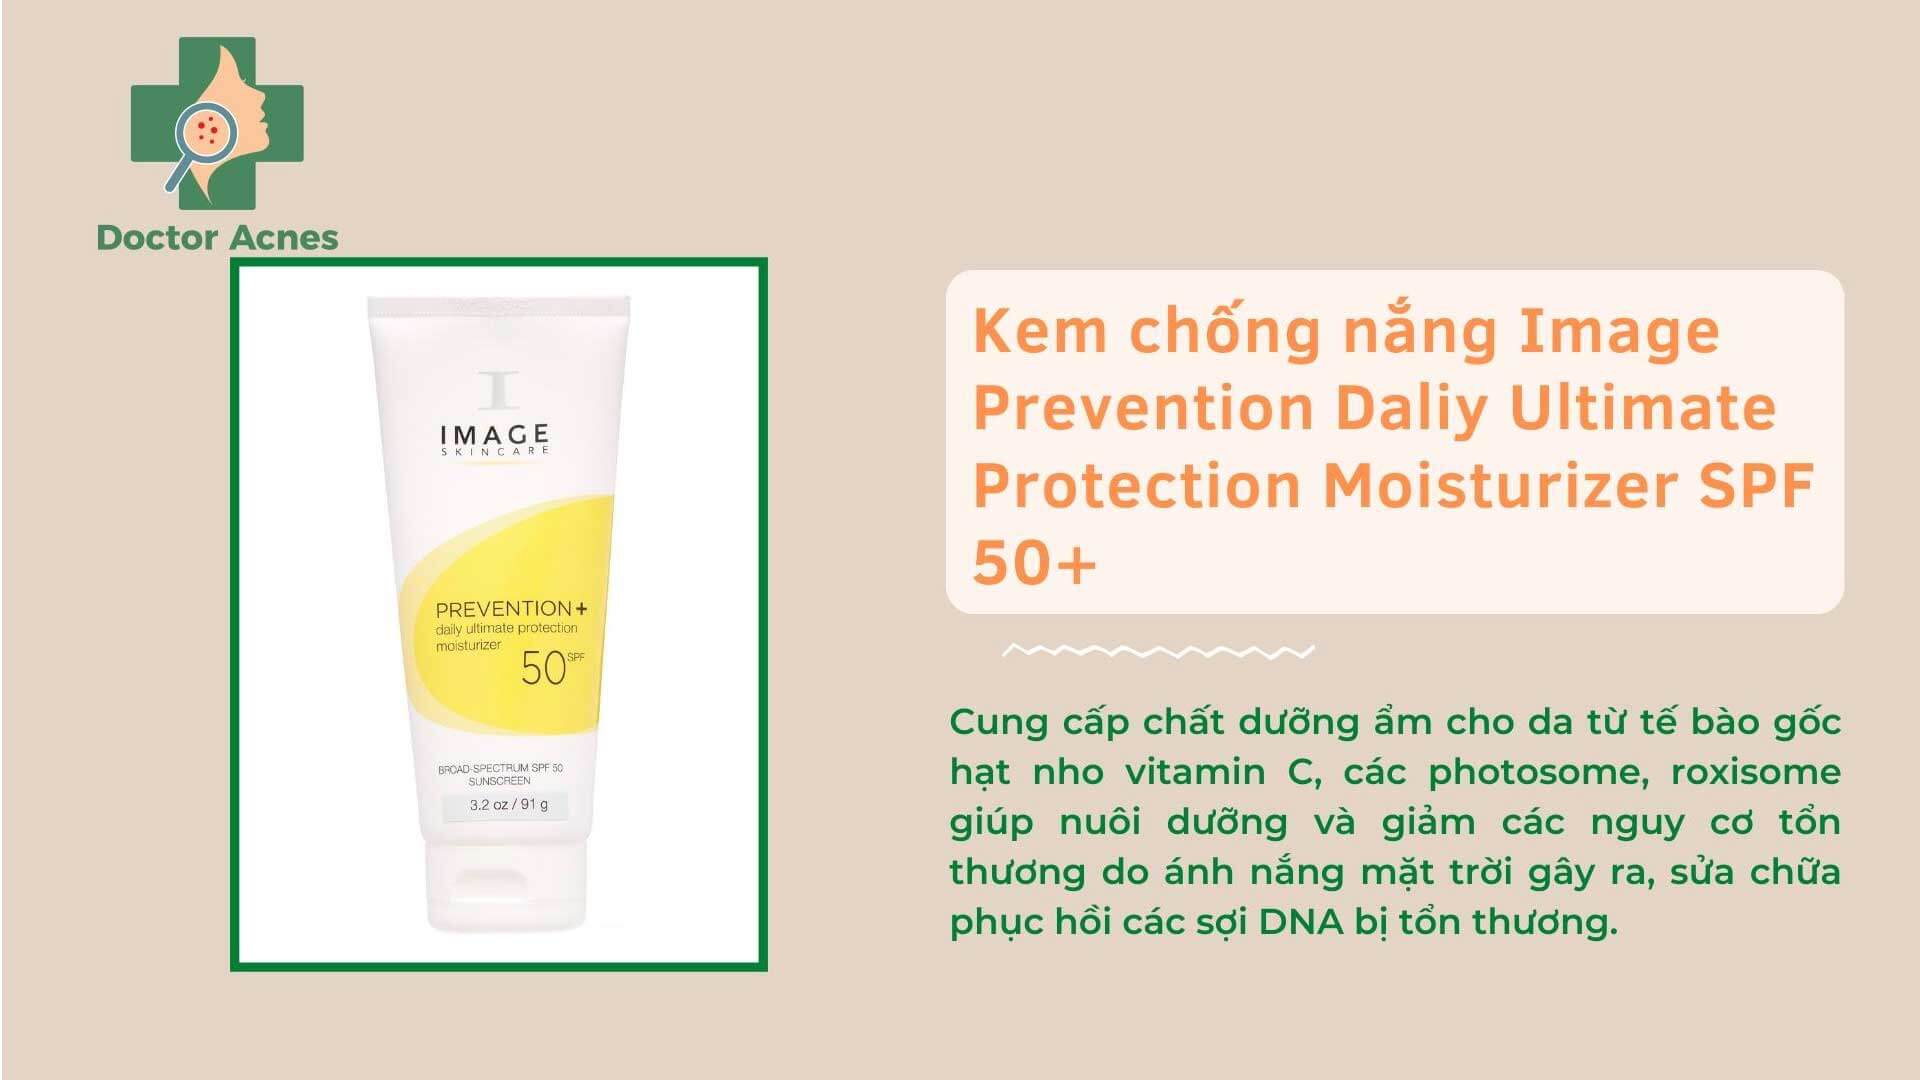 KCN Image Prevention Daliy Ultimate Protection Moisturizer SPF 50+ - Doctor Acnes